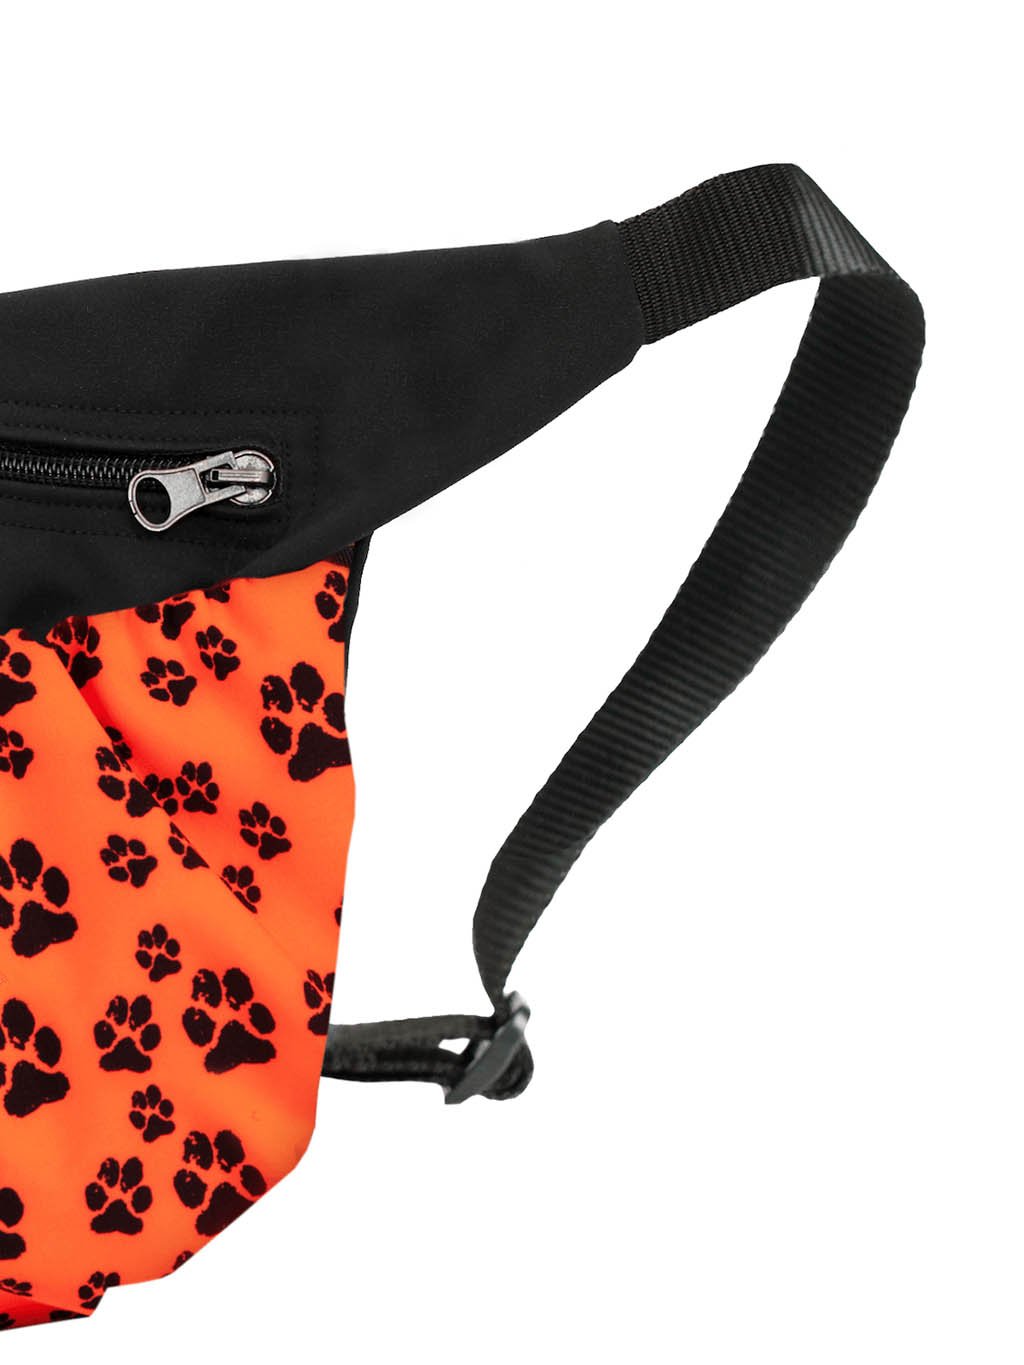 Treat bag 2in1 neon orange with paws 4dox